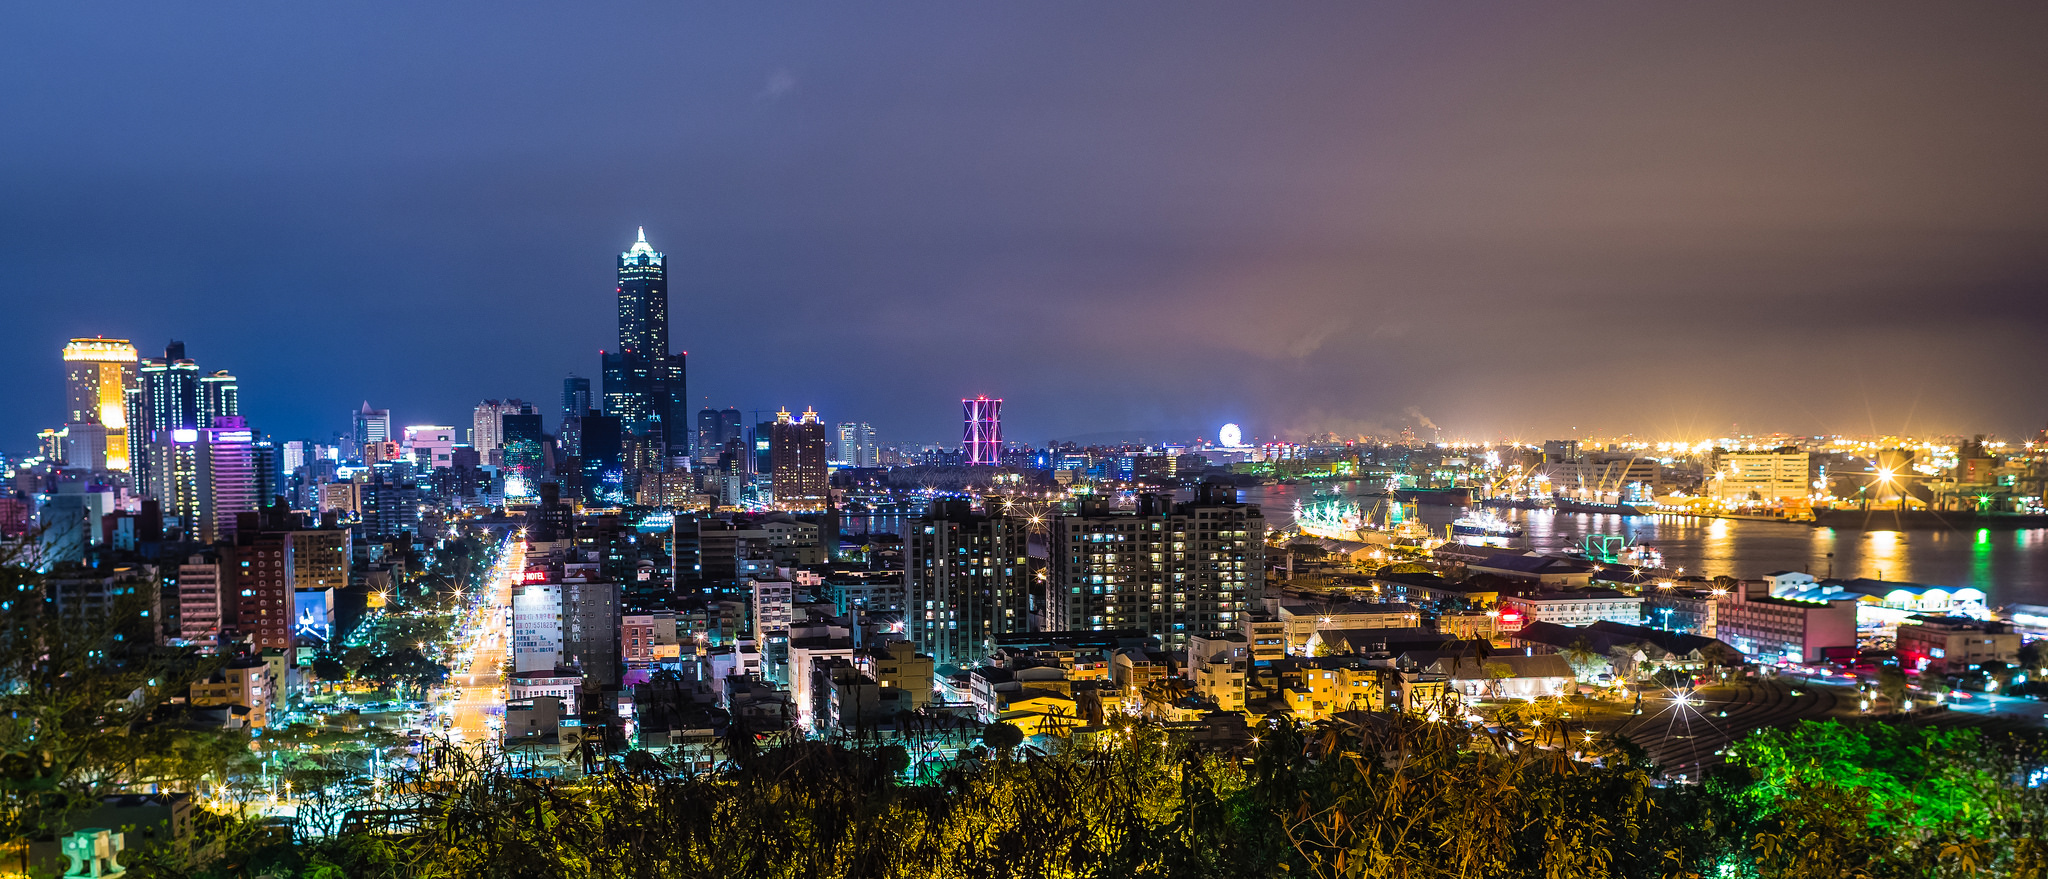 Nice Images Collection: Kaohsiung Desktop Wallpapers